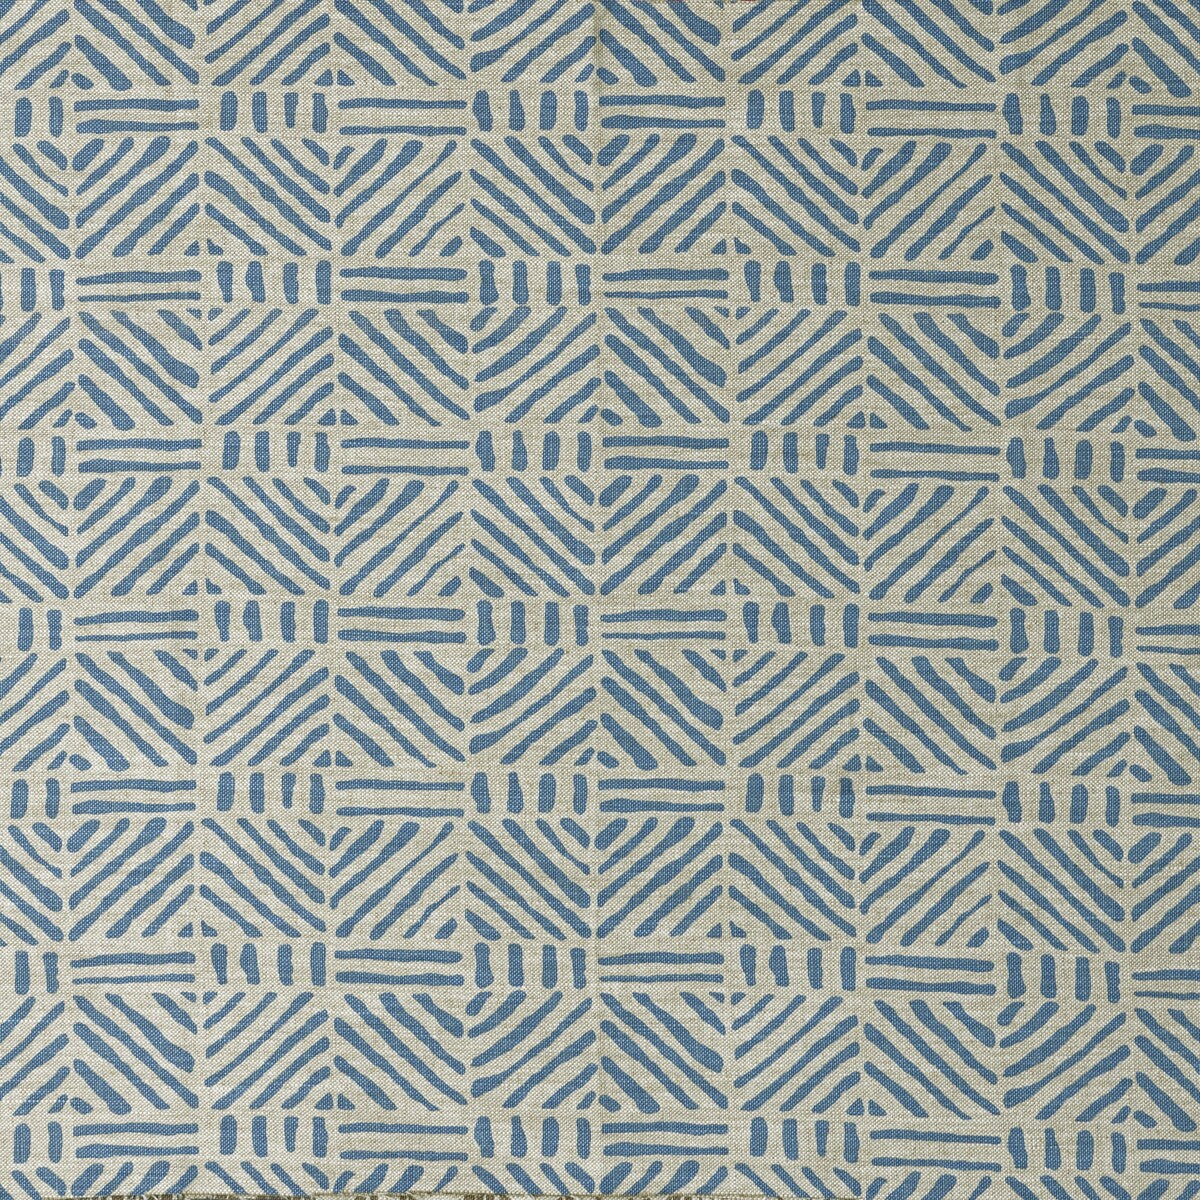 Linwood fabric in lagoon color - pattern BFC-3681.5.0 - by Lee Jofa in the Blithfield collection